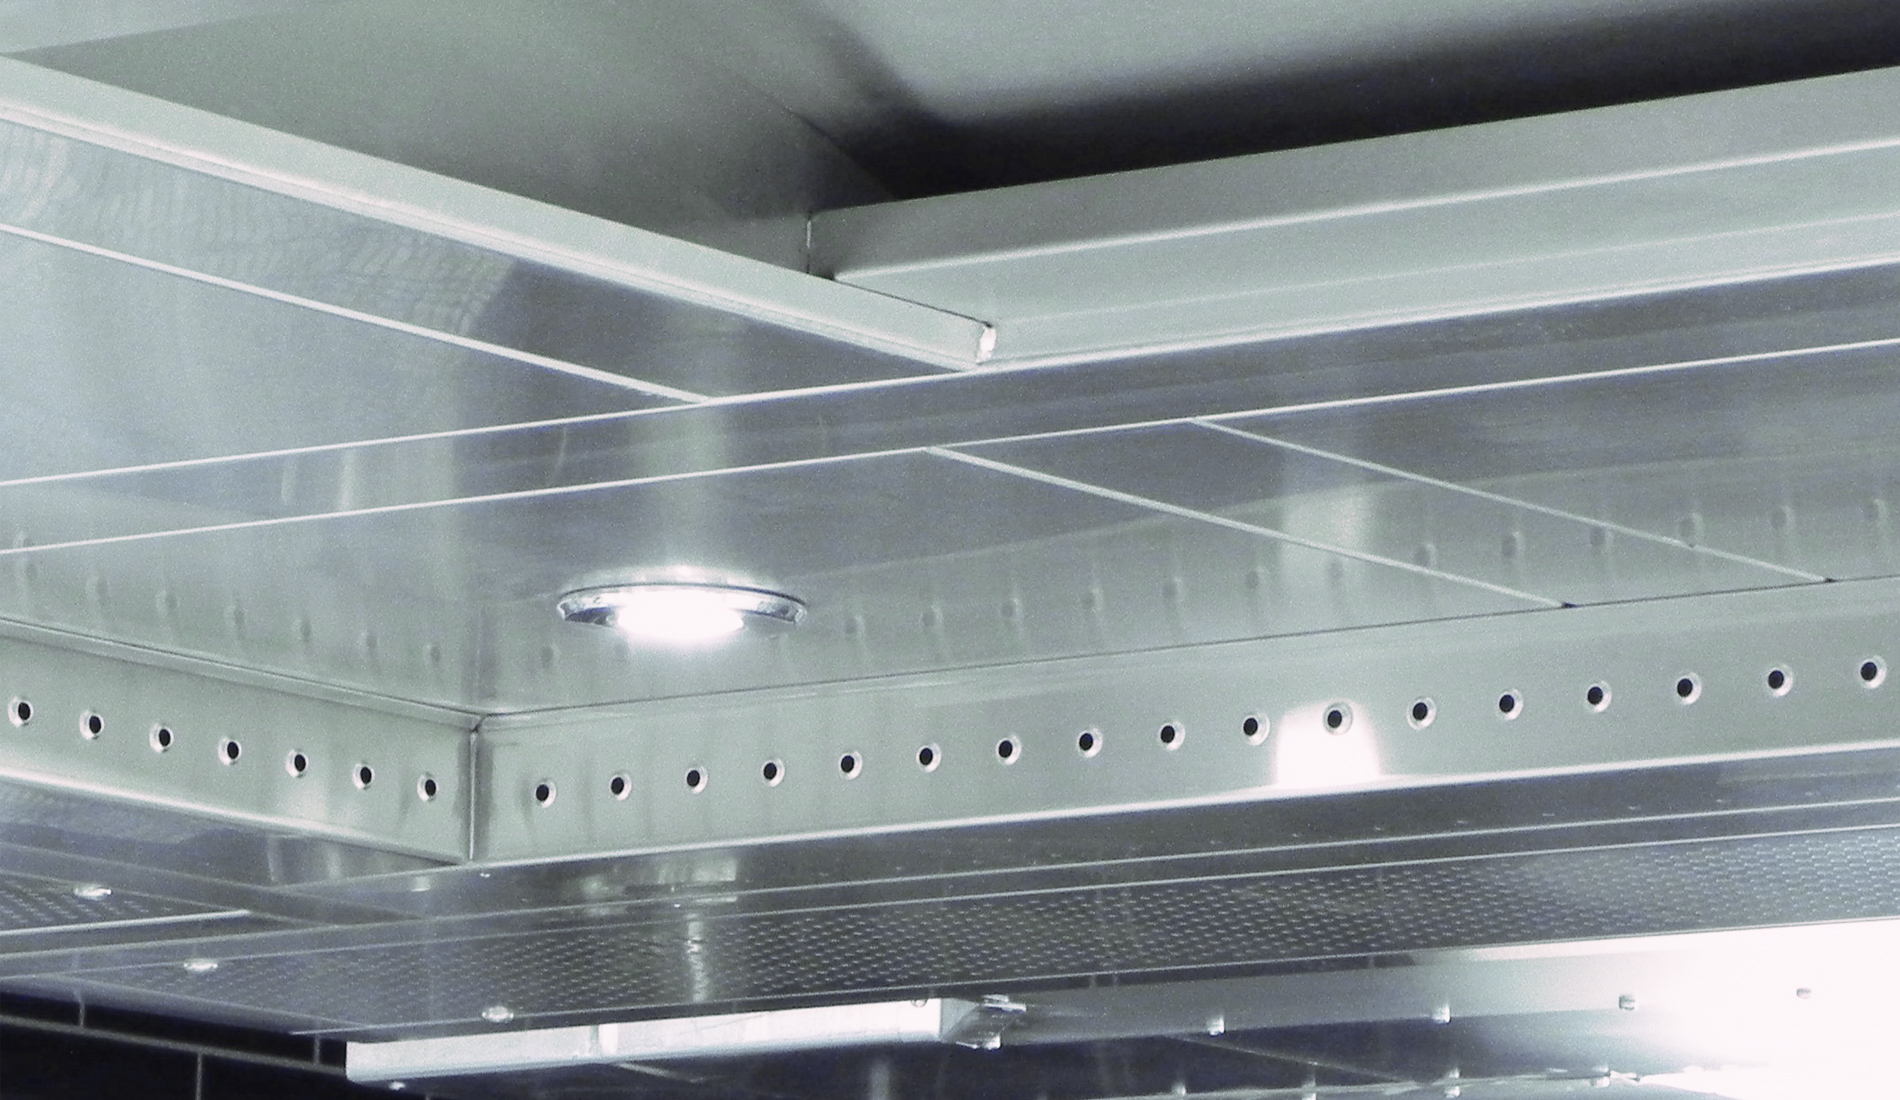 CCL Cyclocell cassette ventilated ceiling